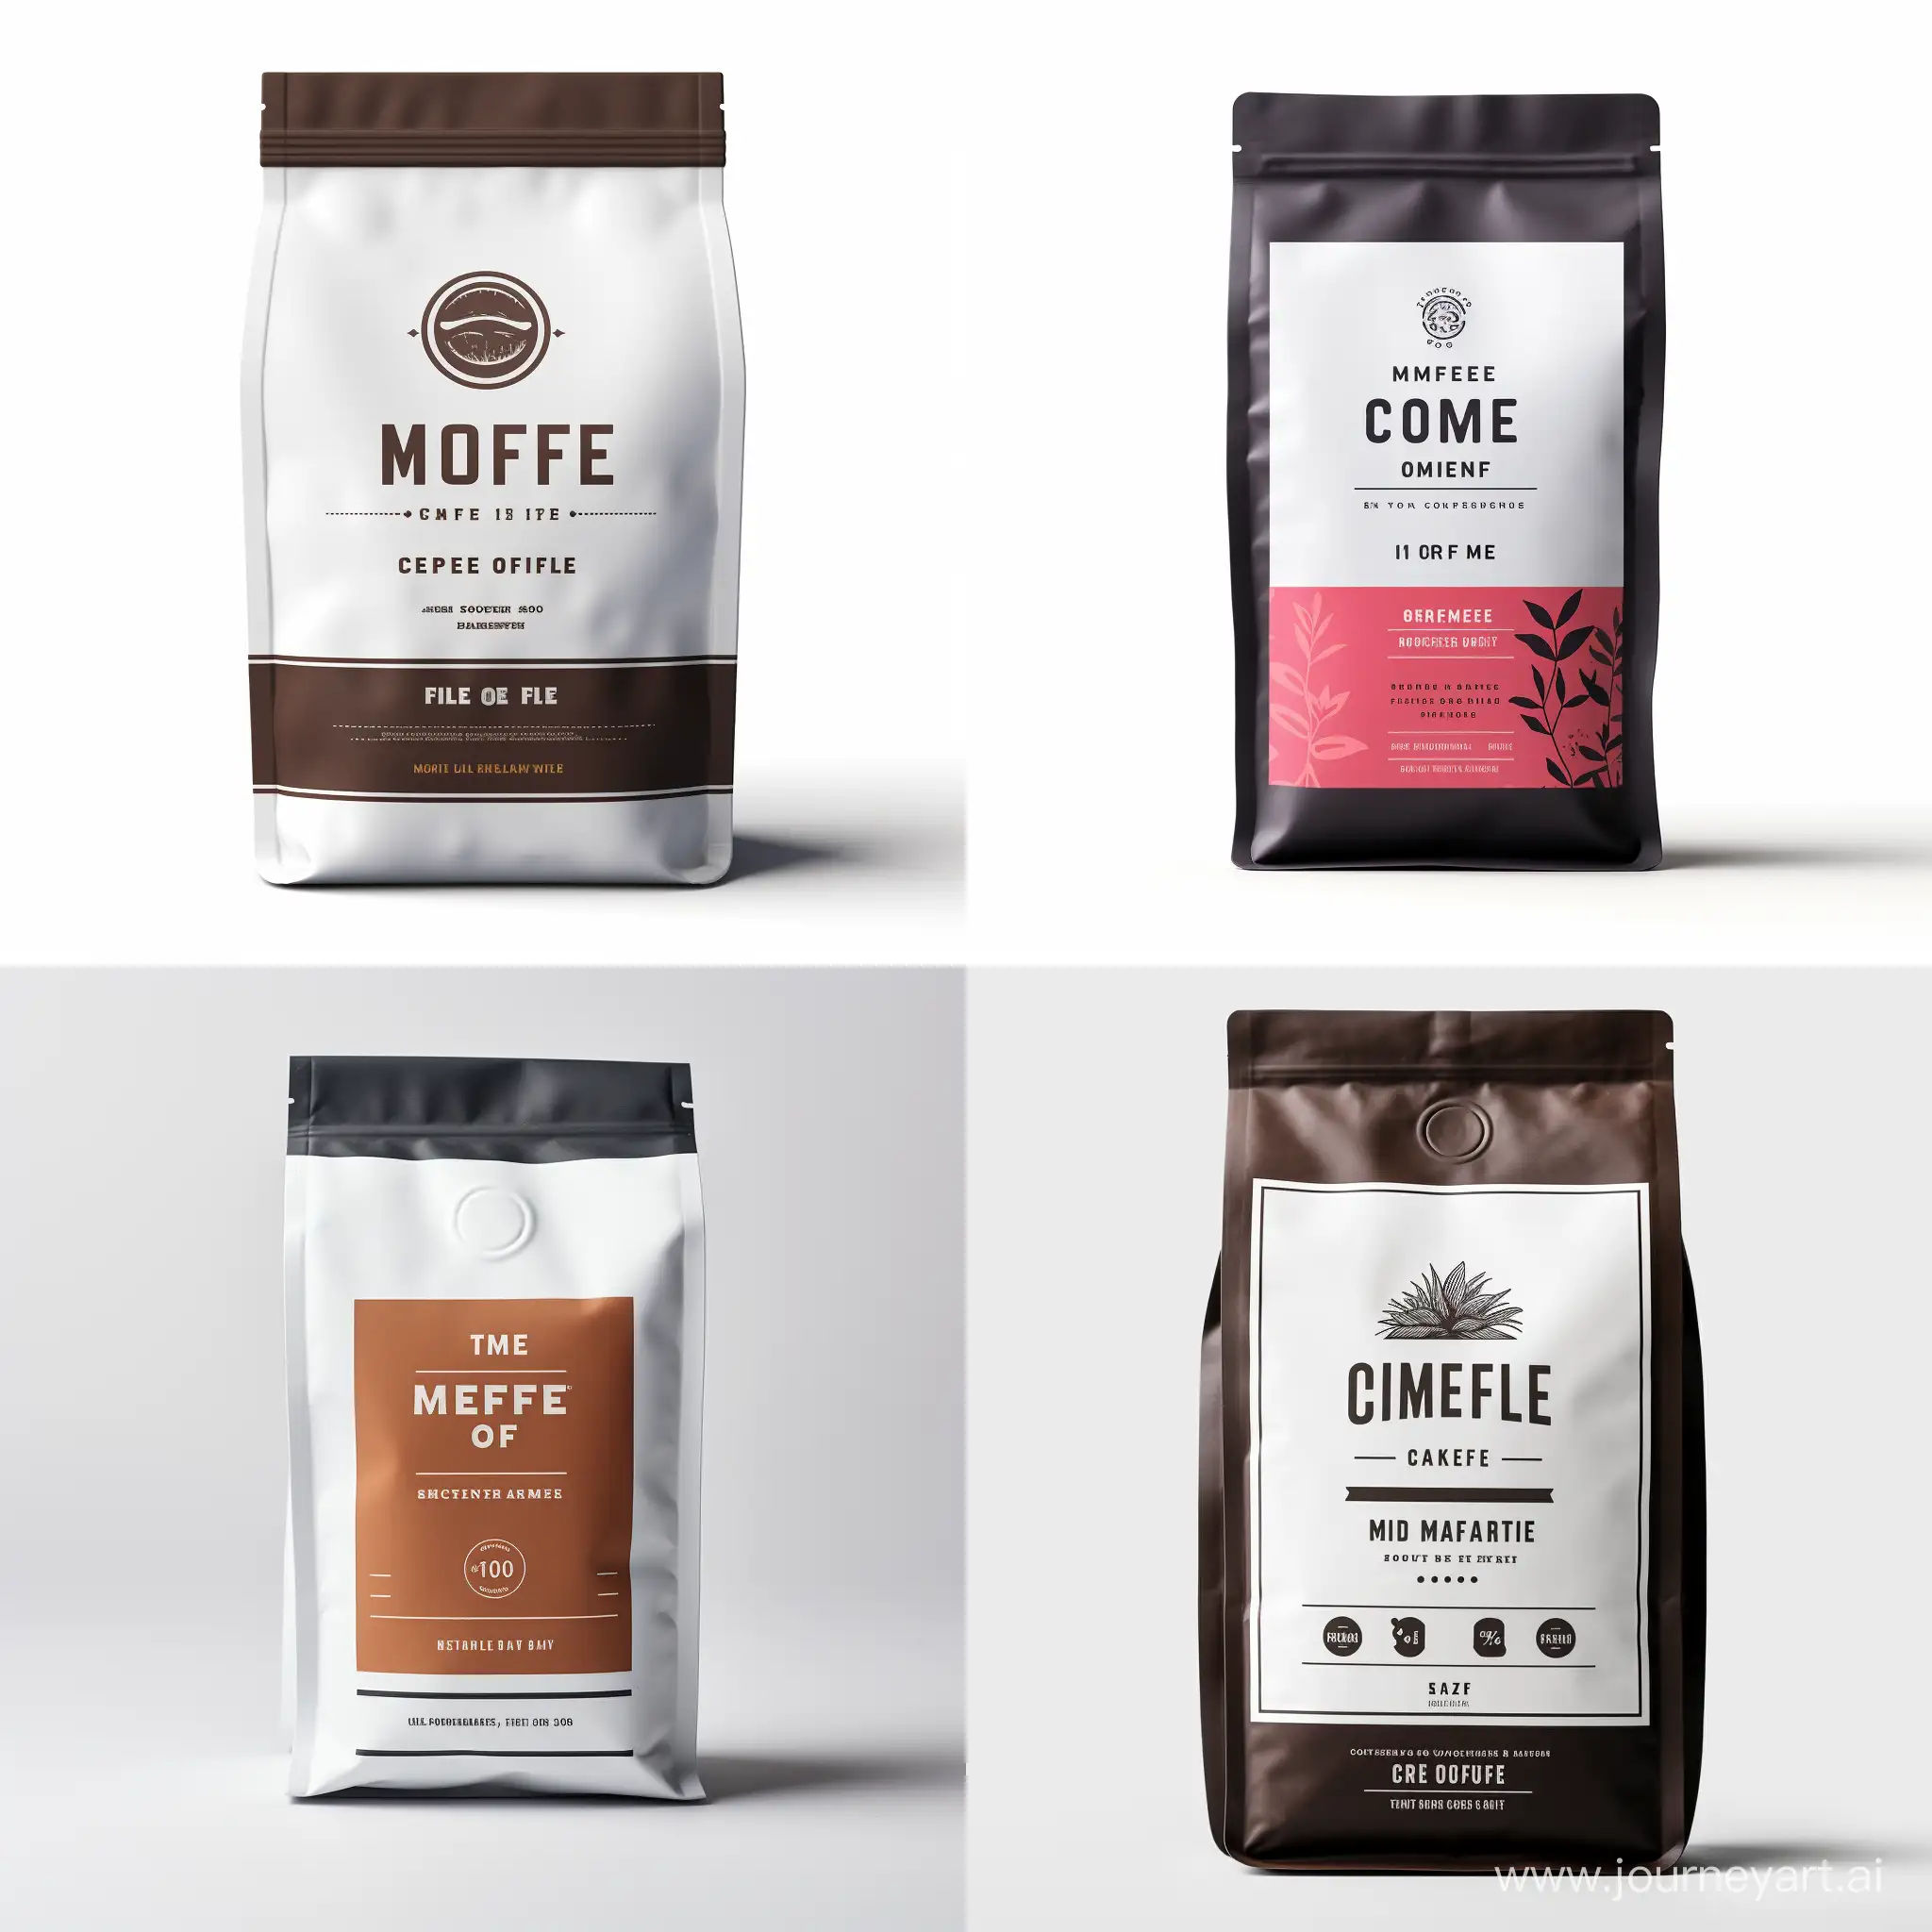 Me-Coffee-Product-Packaging-on-White-Background